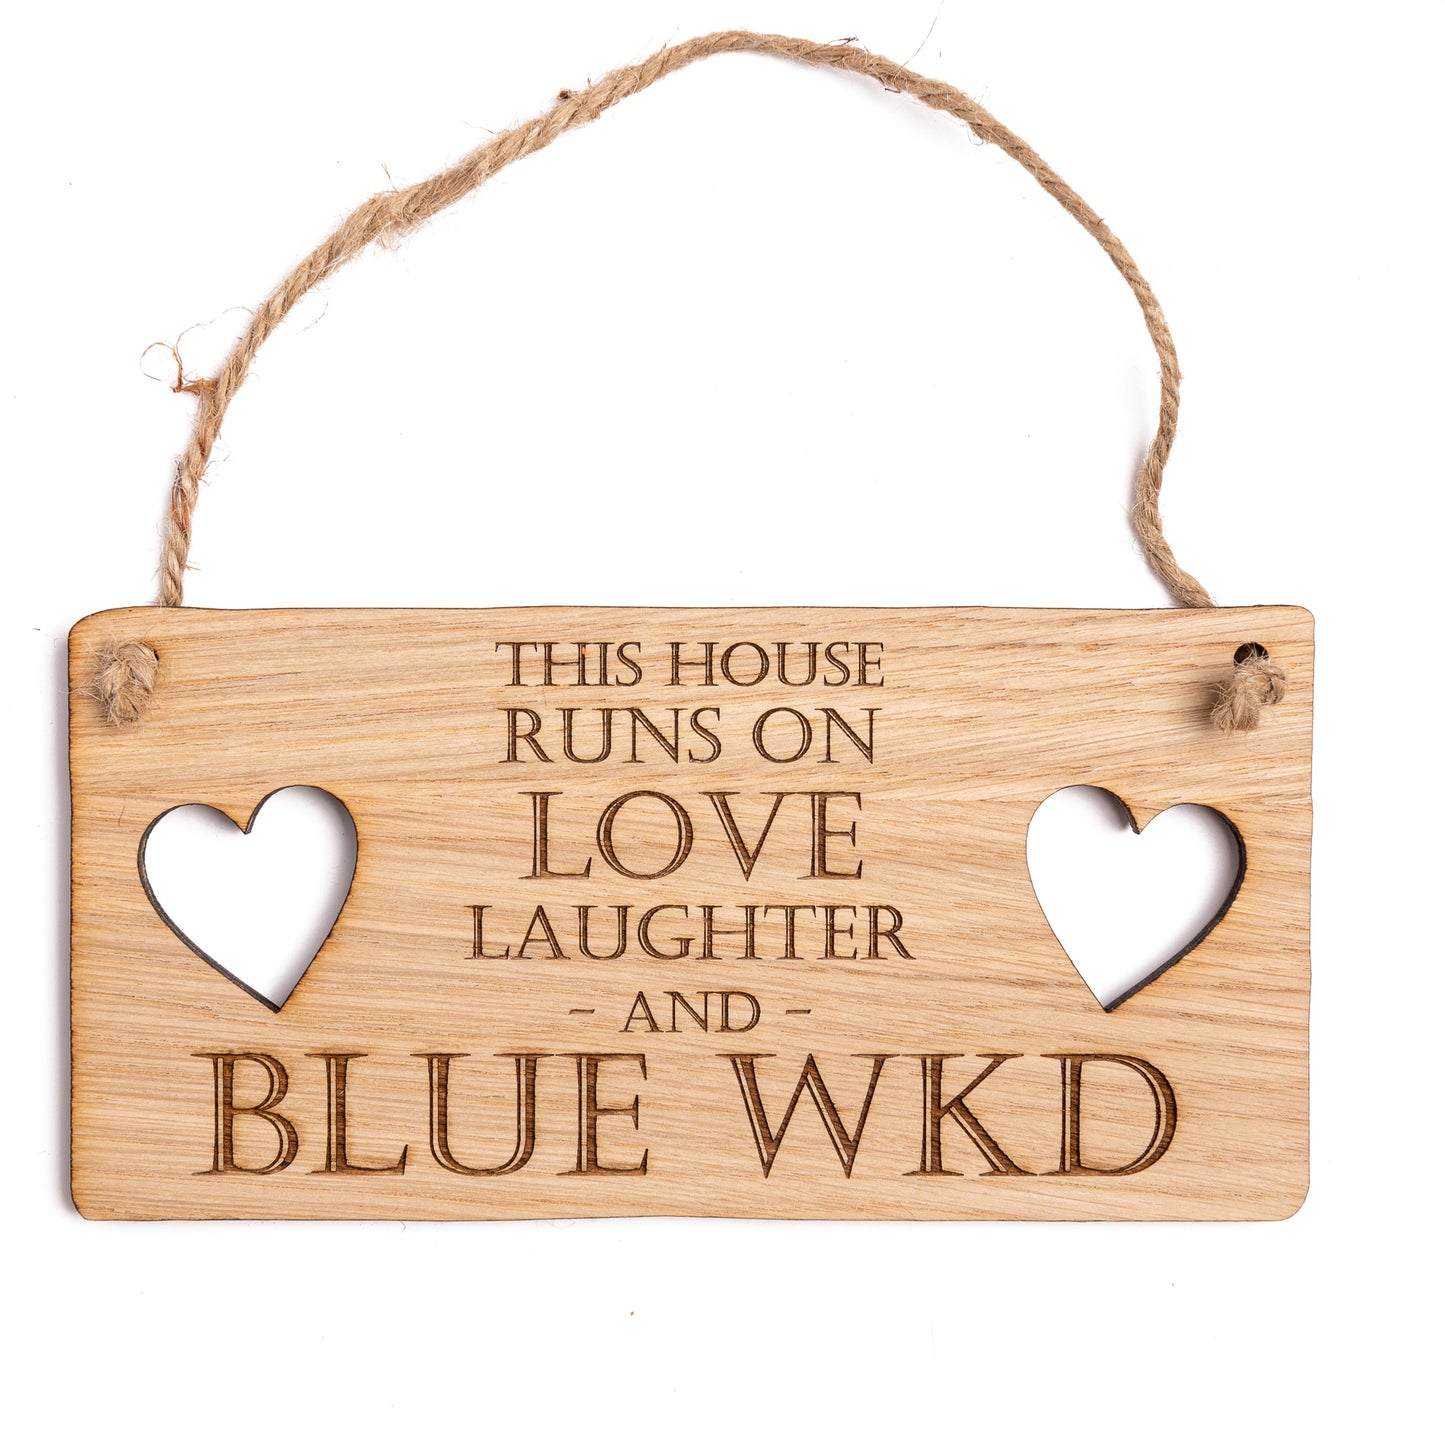 Blue WKD Hanging Sign - This House Runs On Love Laughter And BLUE WKD Plaque